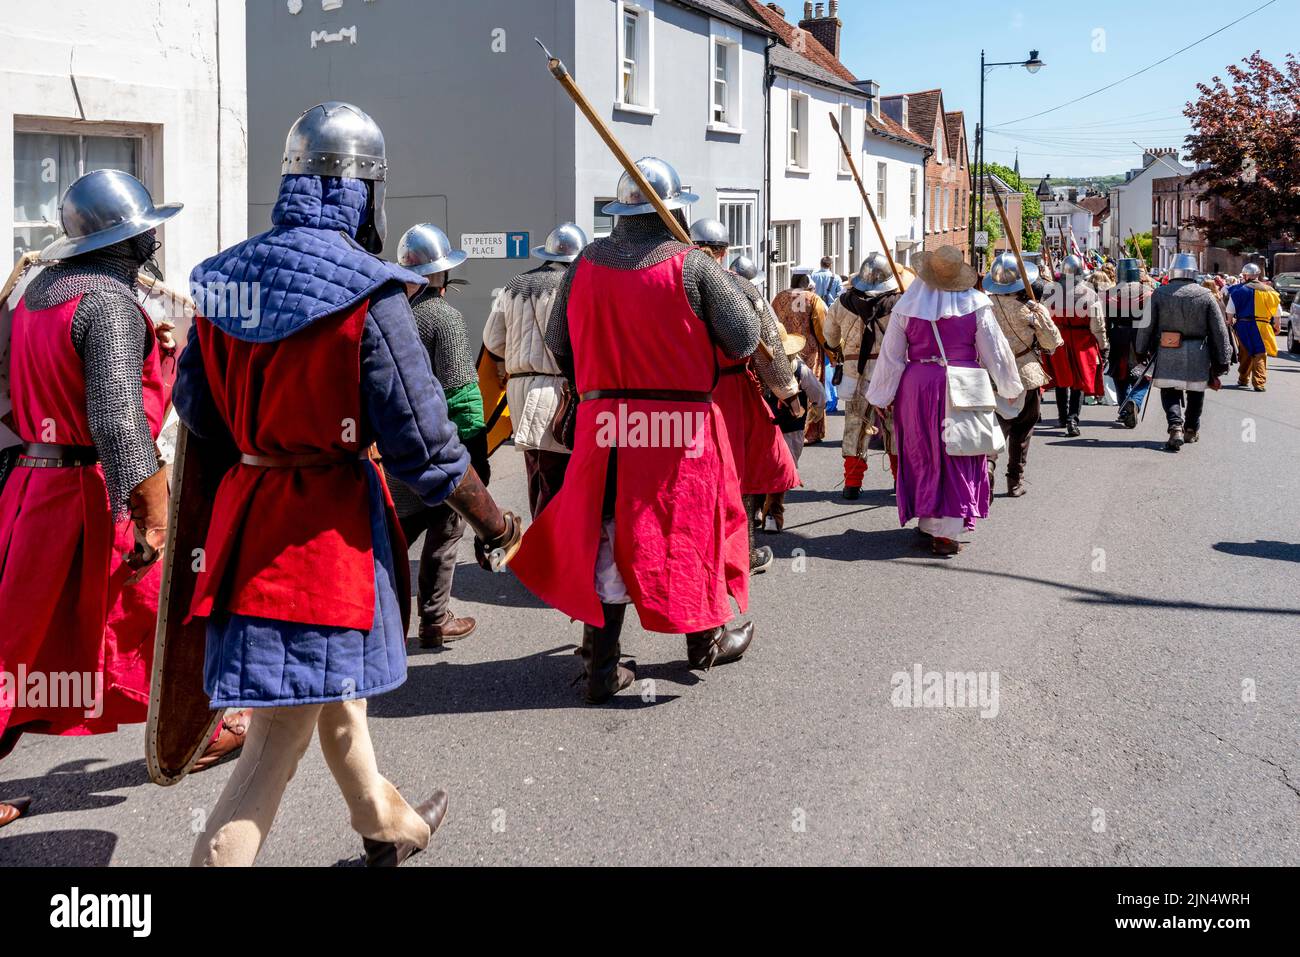 Men Dressed In Medieval Costume Prepare To Take Part In A Re-Enactment Of The 13th Century Battle Of Lewes , Lewes, East Sussex, UK. Stock Photo